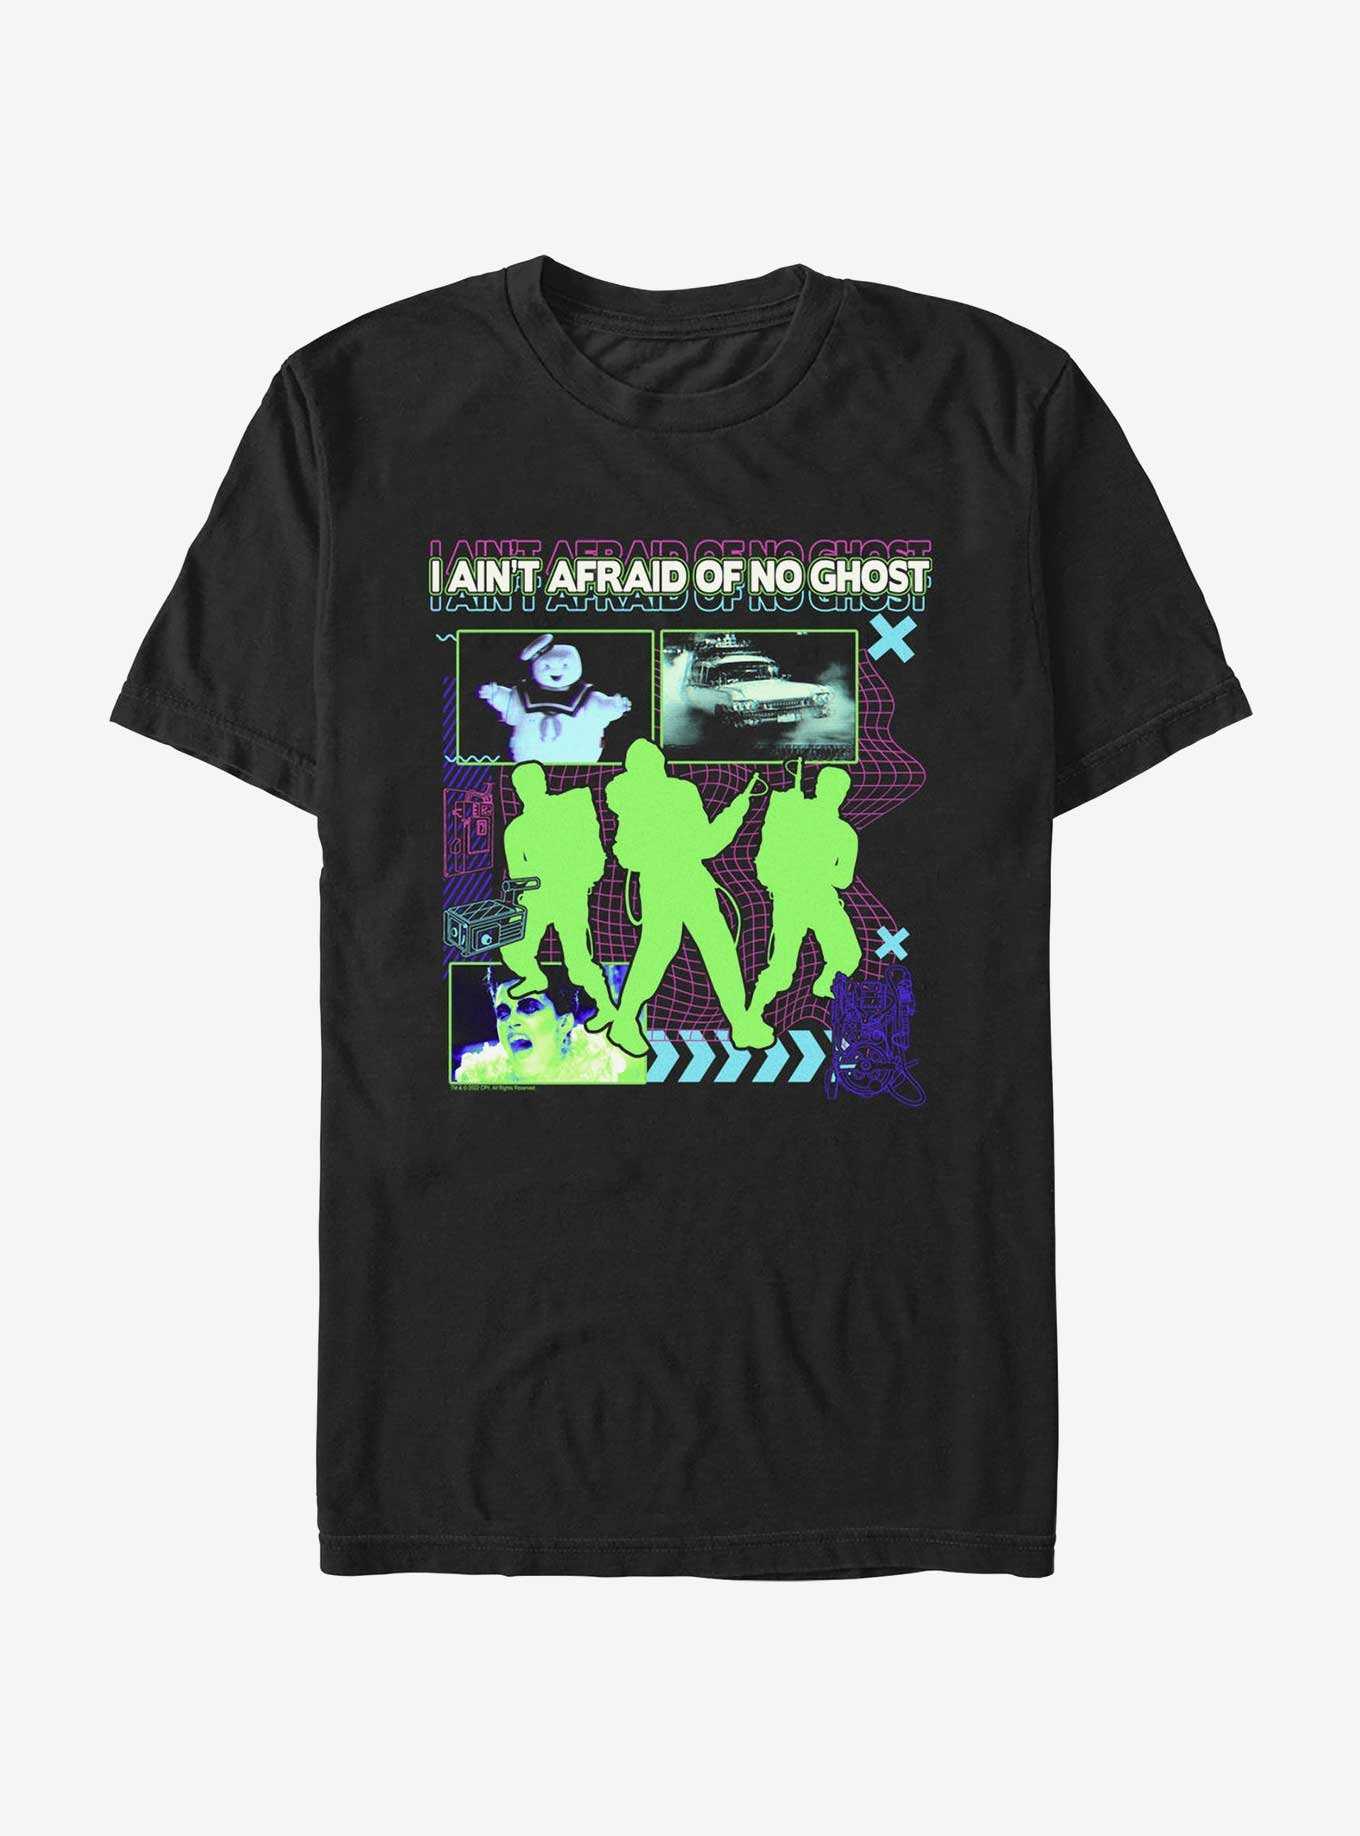 Ghostbusters Afraid Of No Ghost Tech T-Shirt, , hi-res